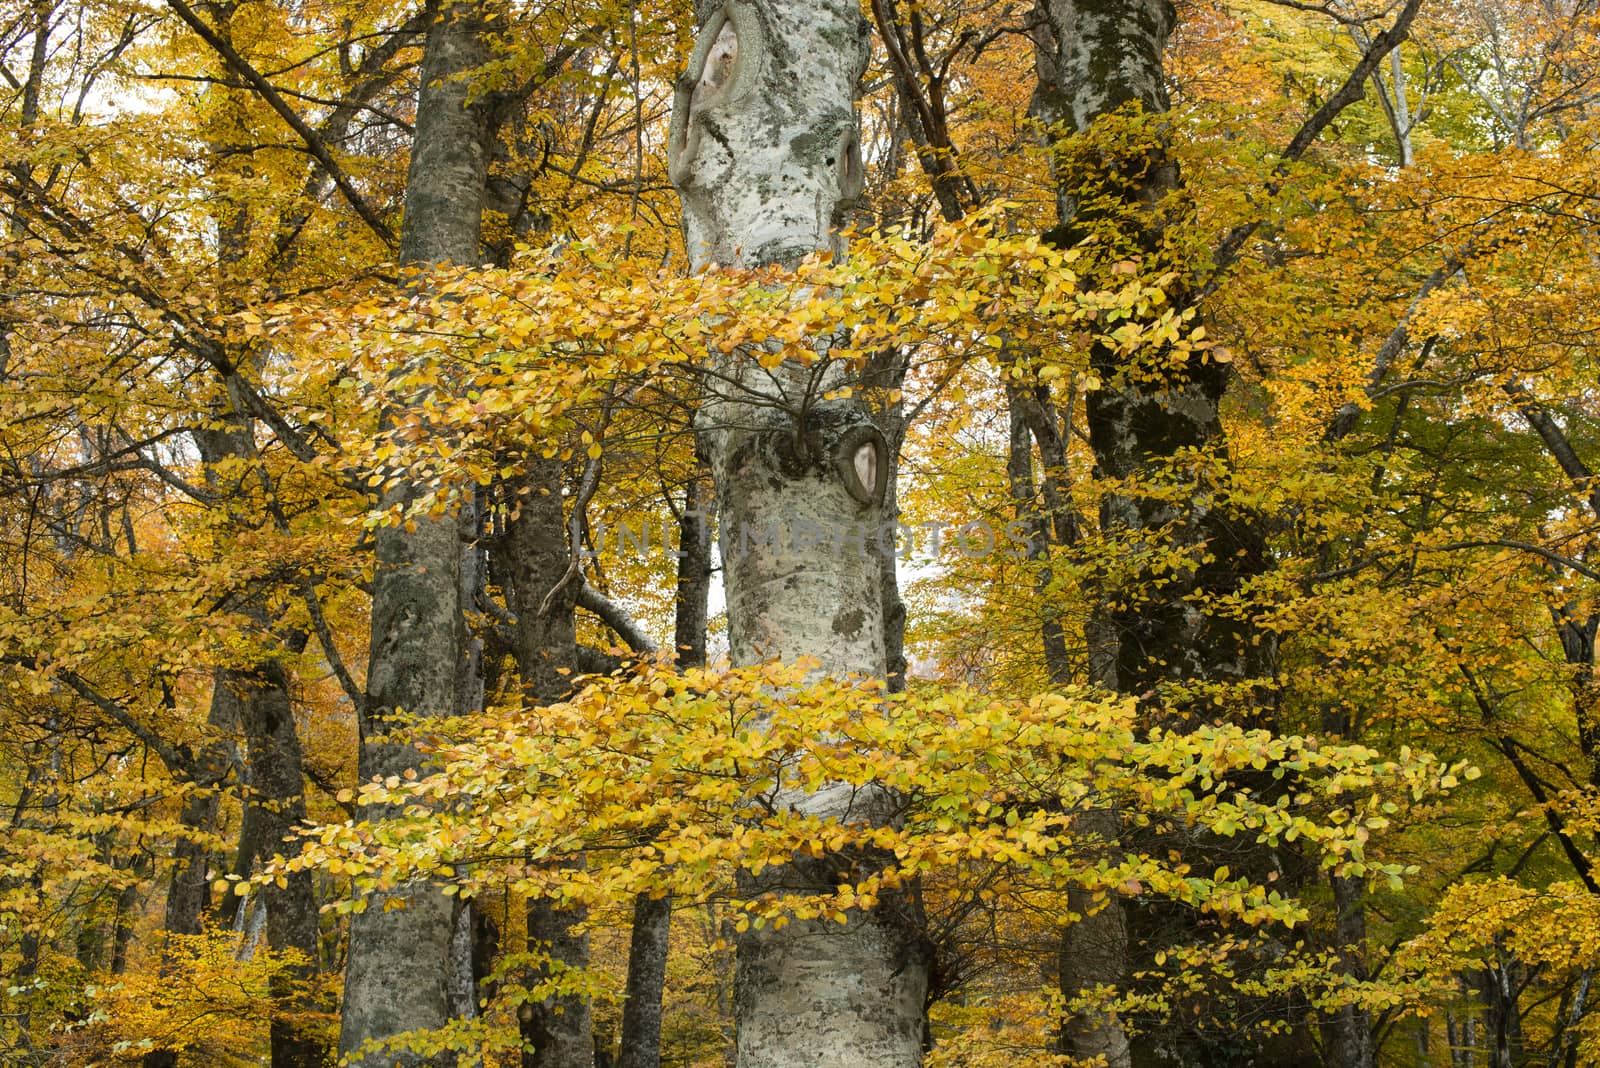 Beech forest in Autumn by AlessandroZocc